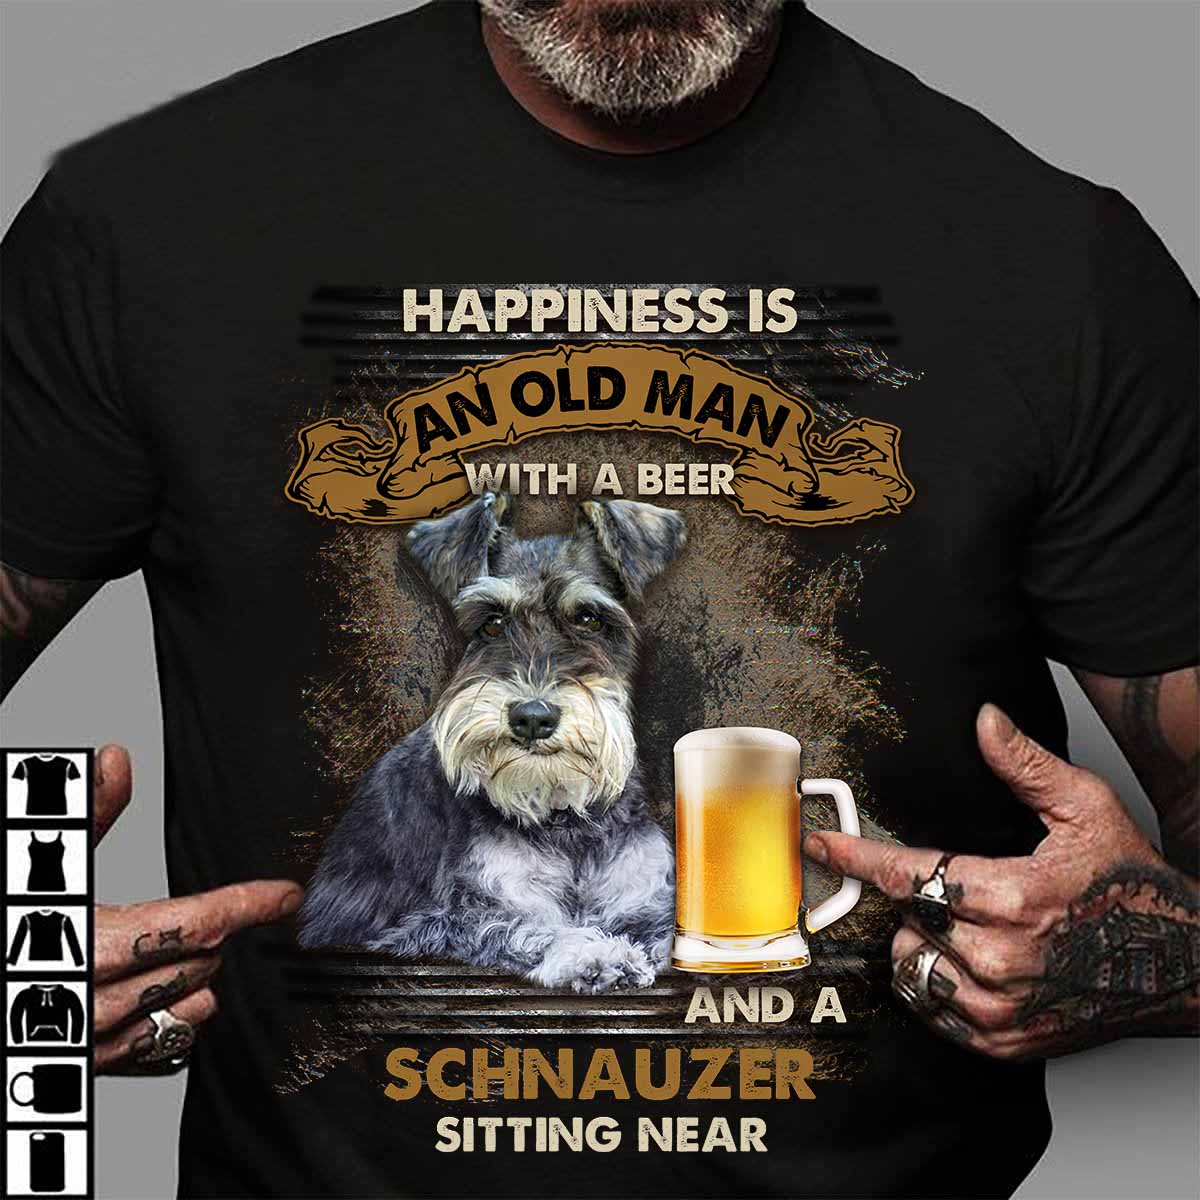 Happiness is an old man with a beer and a Schnauzer sitting near - Beer lover